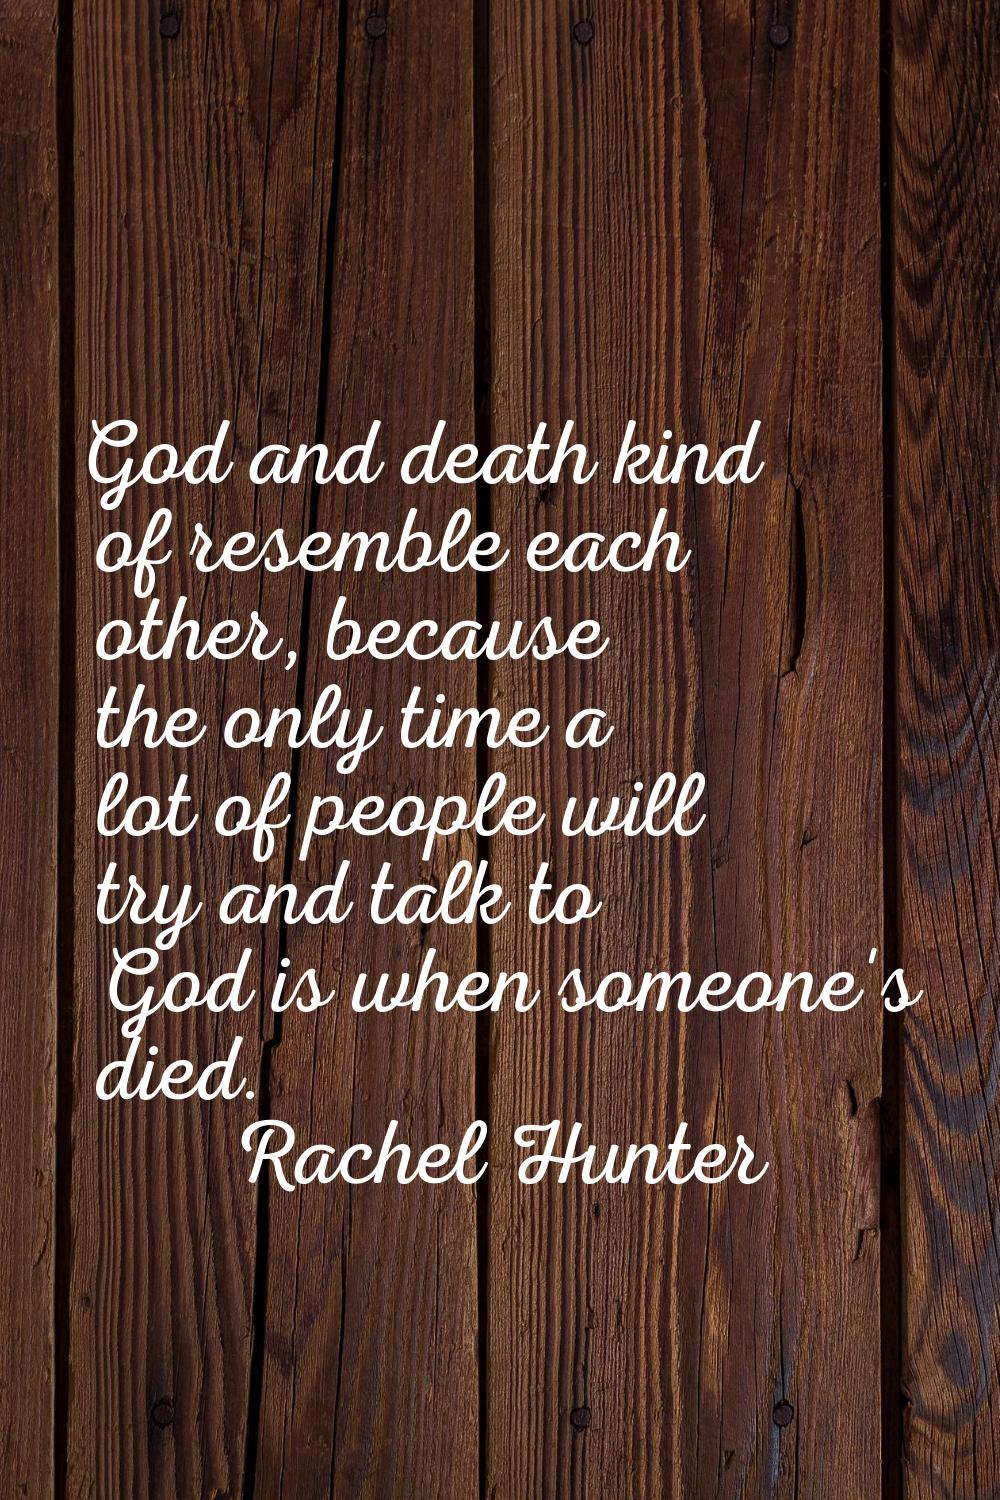 God and death kind of resemble each other, because the only time a lot of people will try and talk 